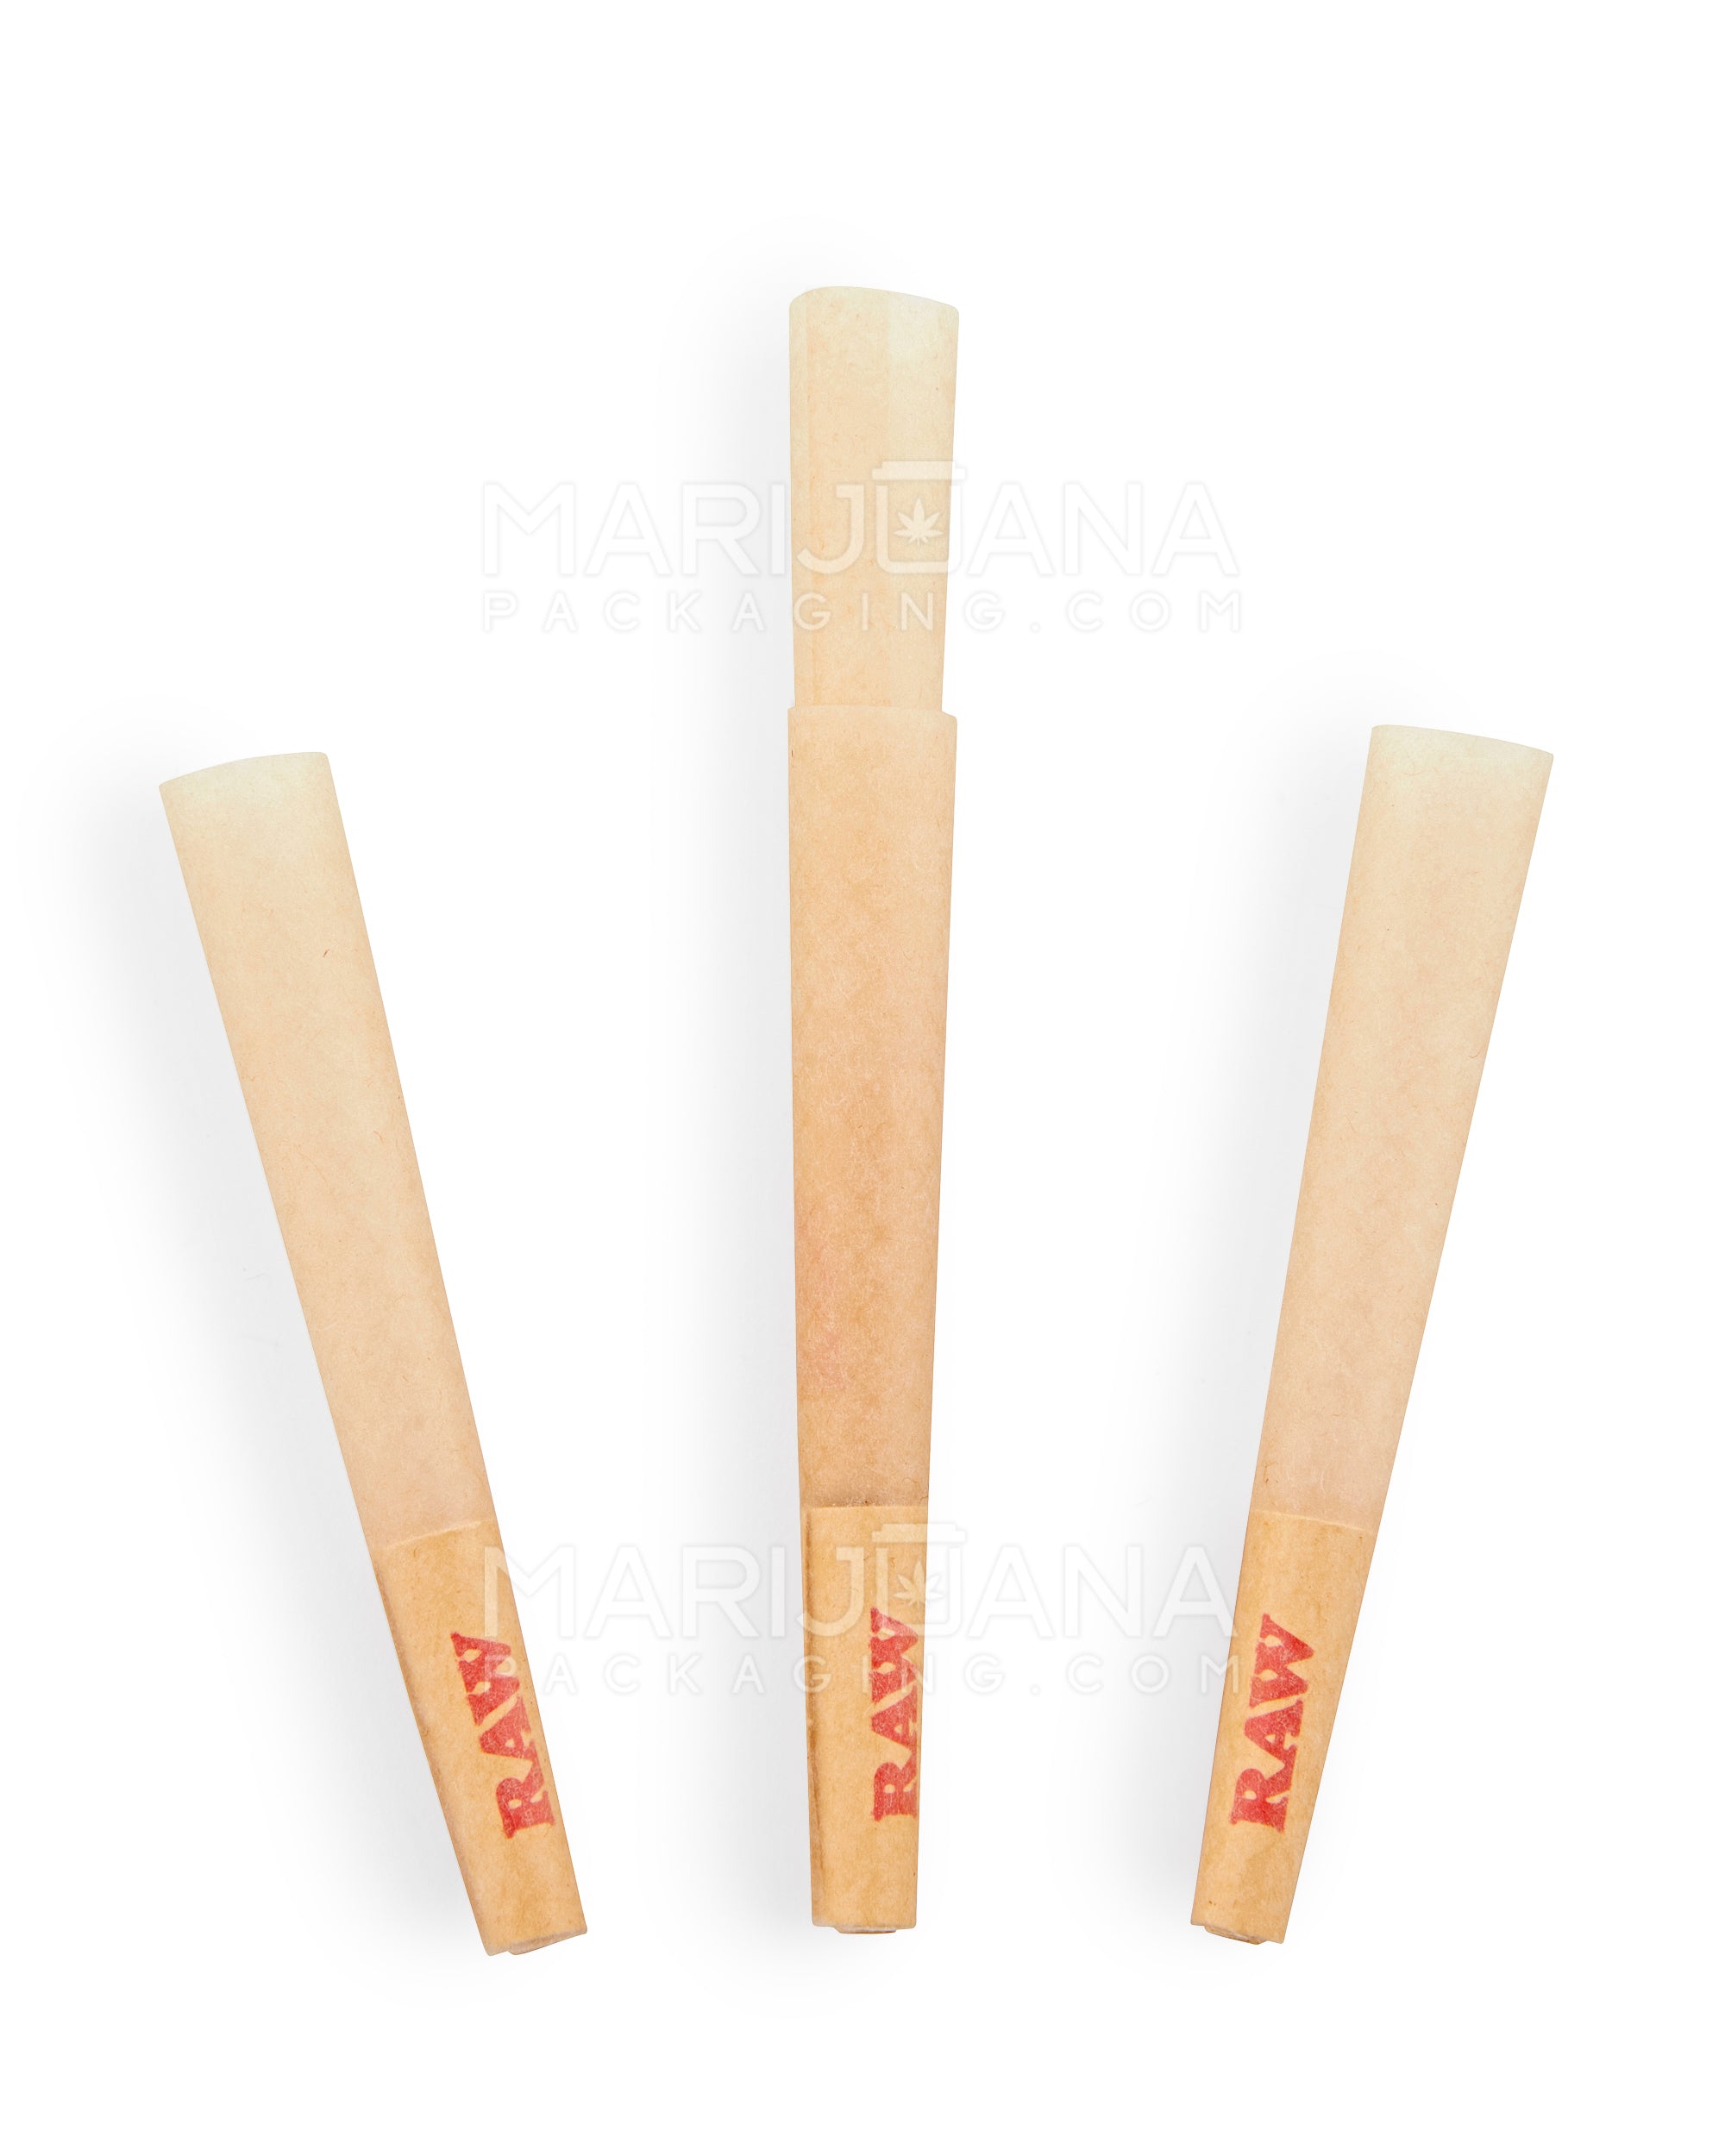 RAW | Classic Single Size Pre-Rolled Cones | 70mm - Unbleached Paper - 600 Count - 3